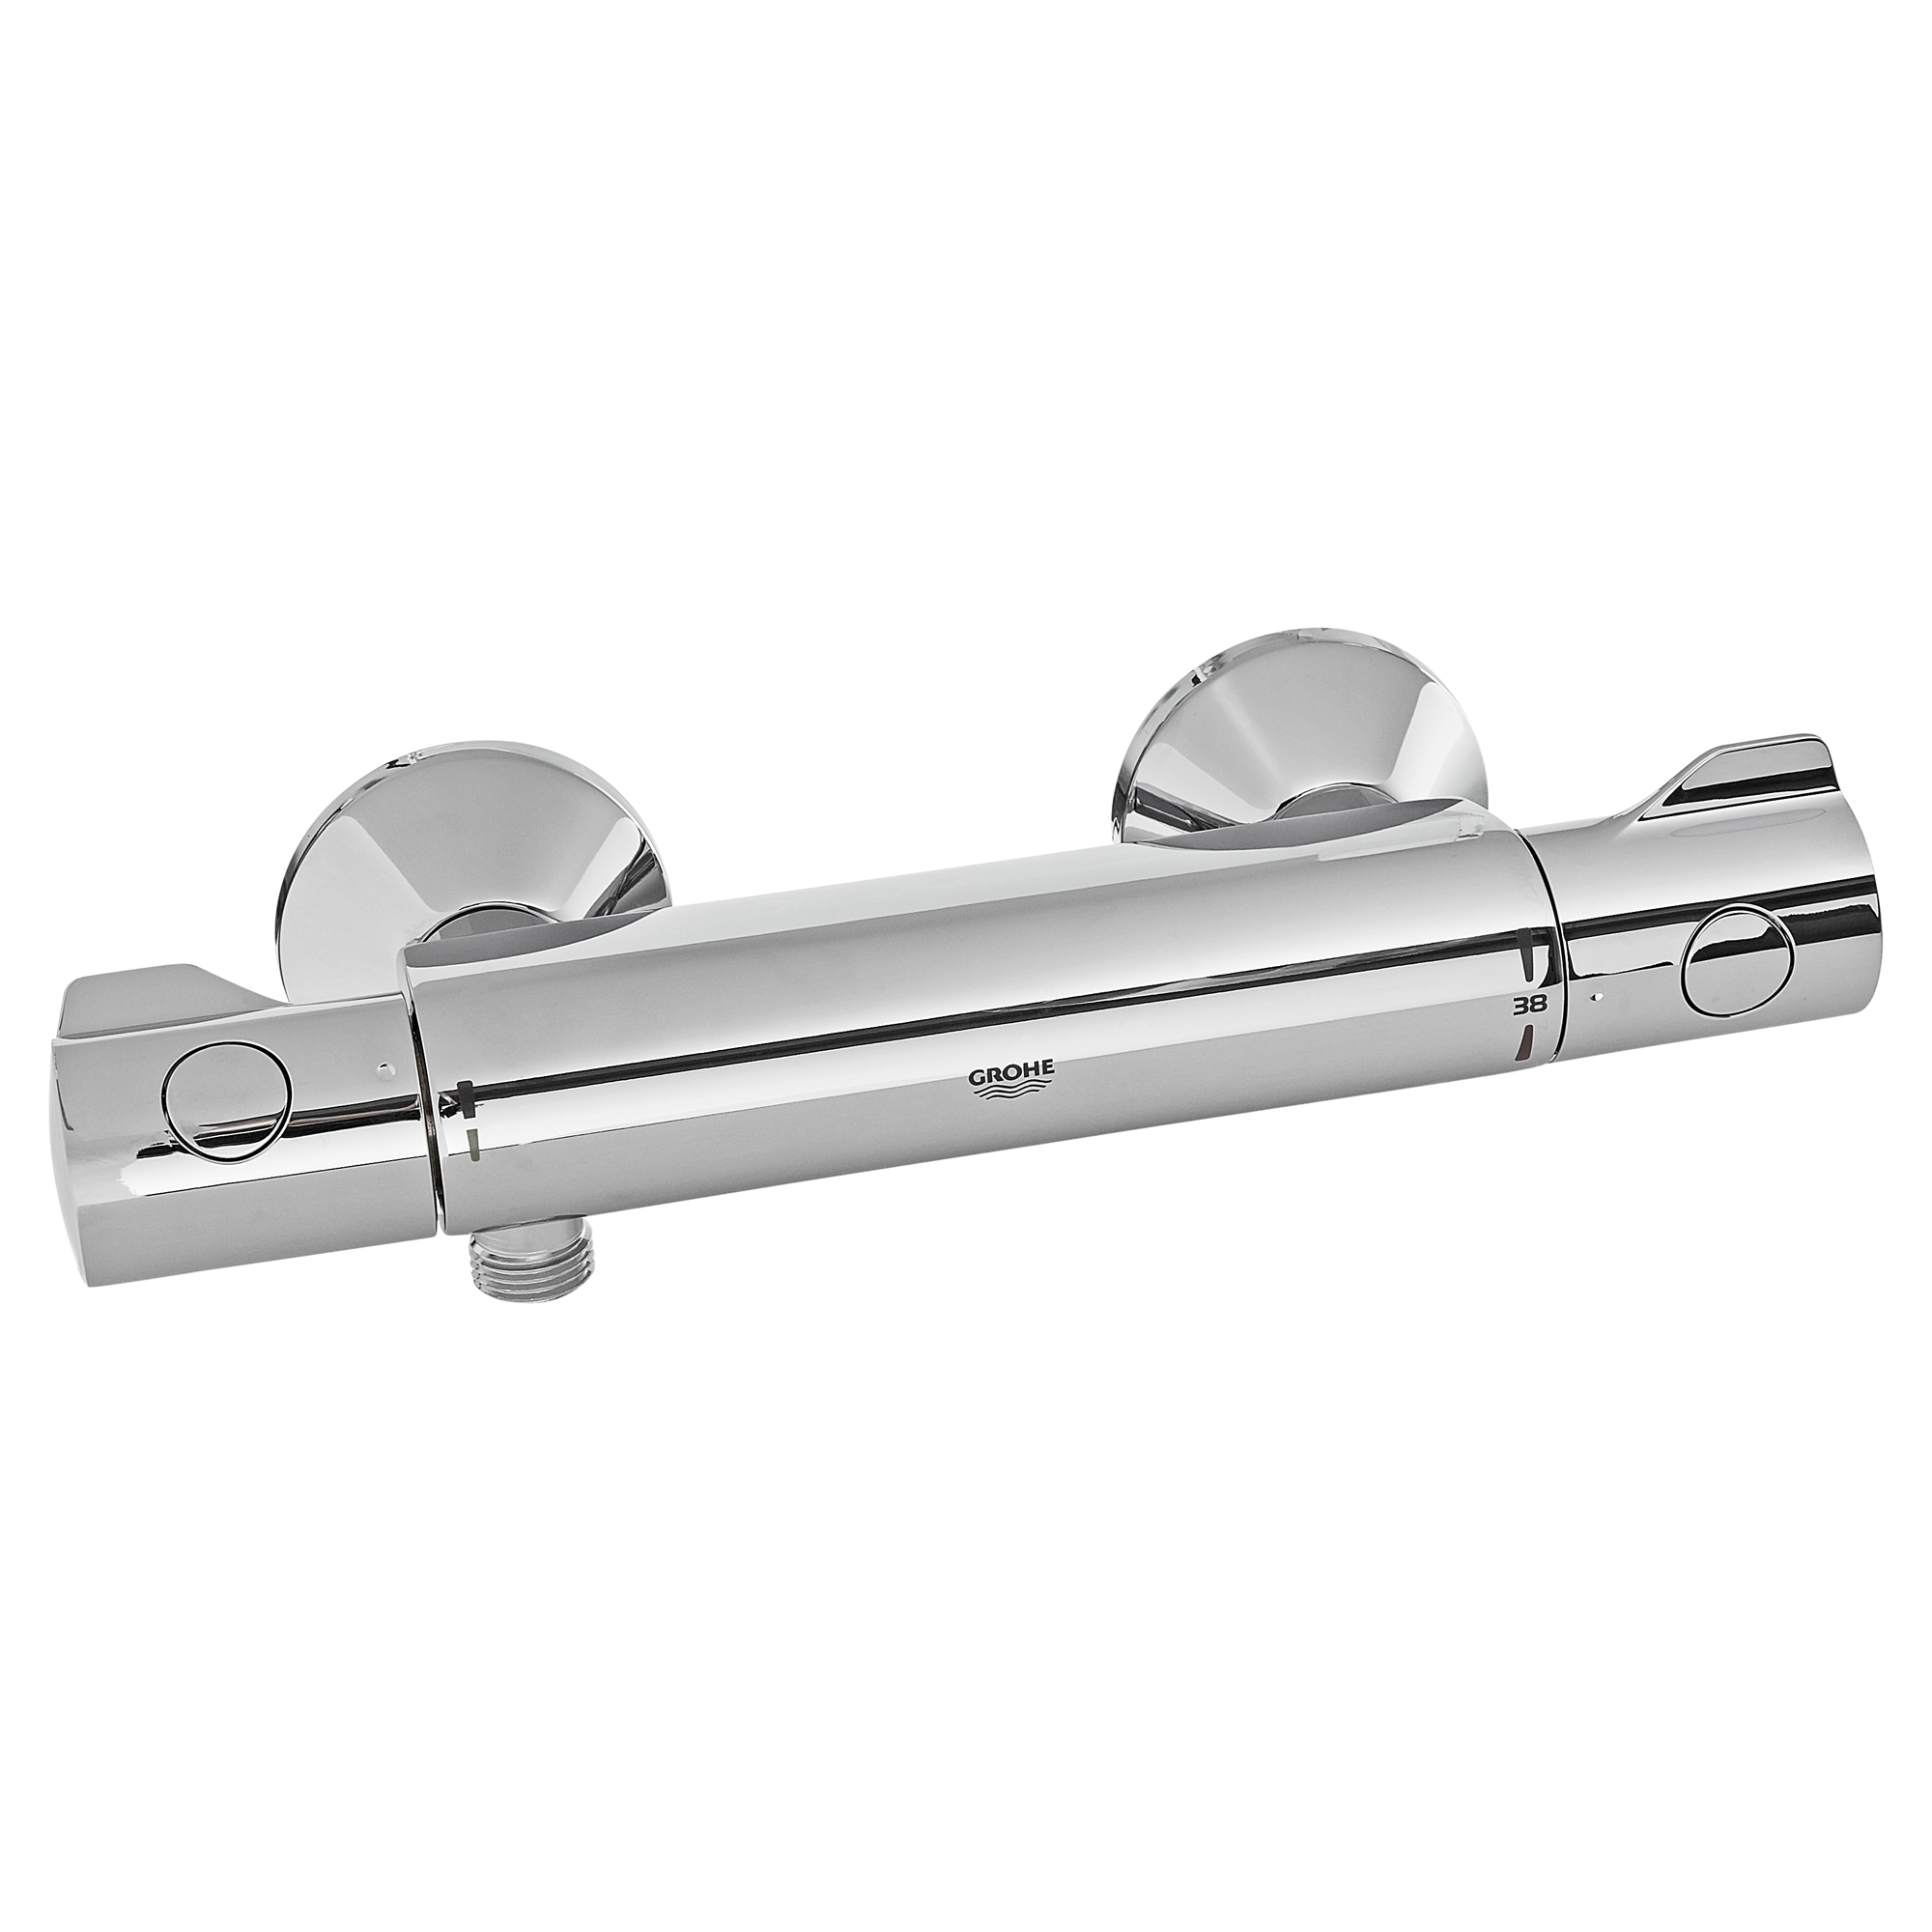 grohe grohtherm 800 praxis - grohe grohtherm 800 douchekraan